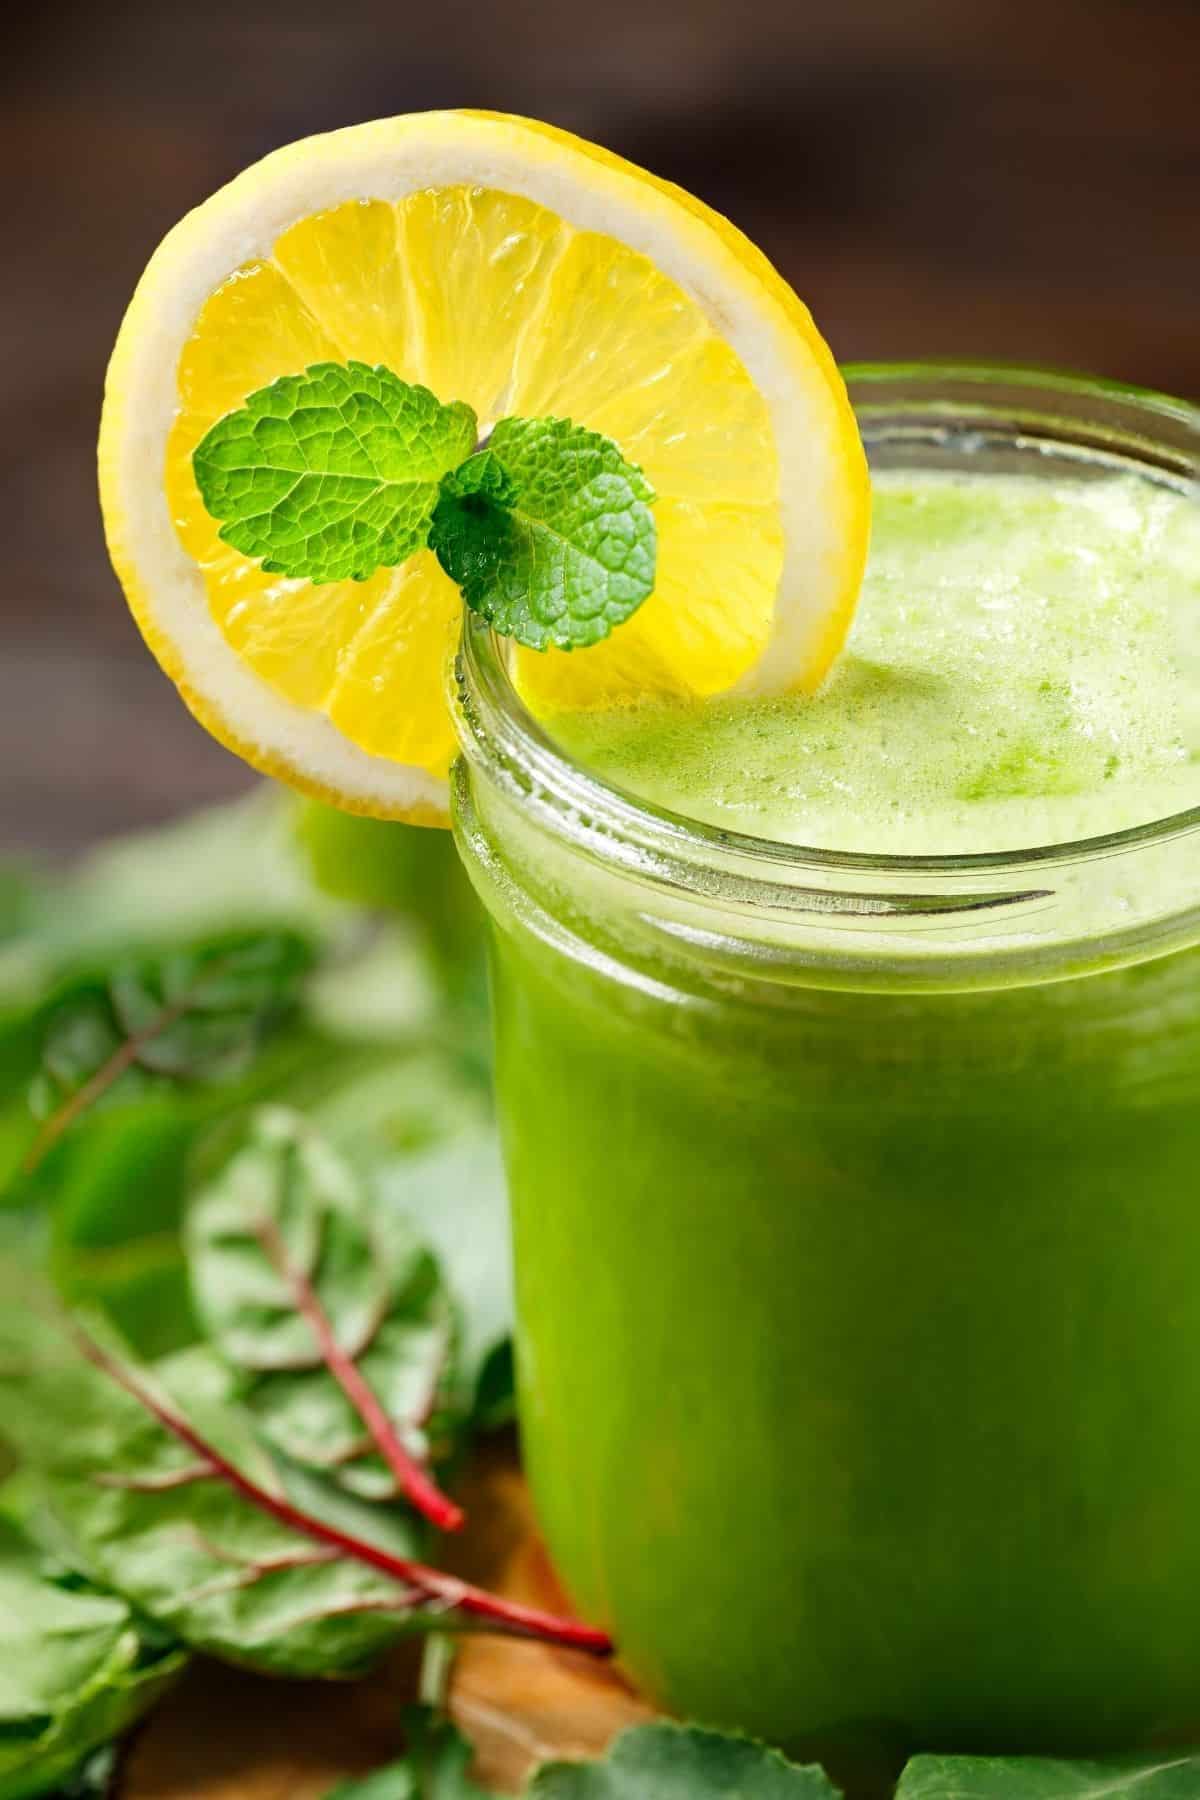 green juice with a slice of lemon on the glass